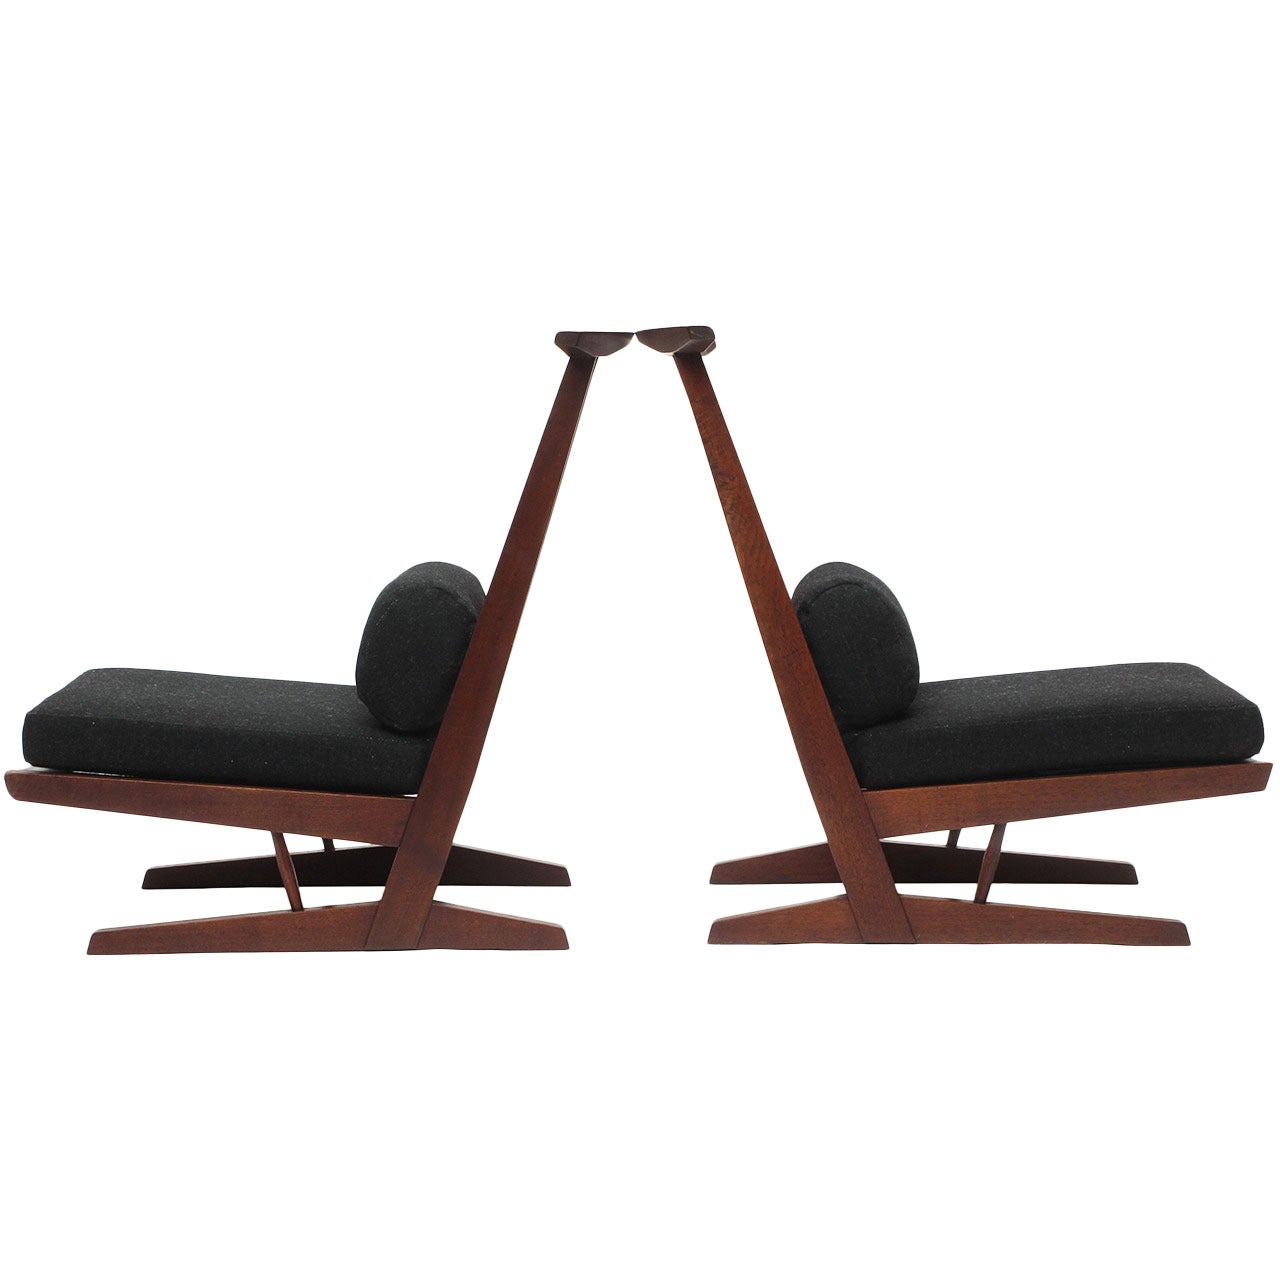 Conoid Lounge Chairs by George Nakashima